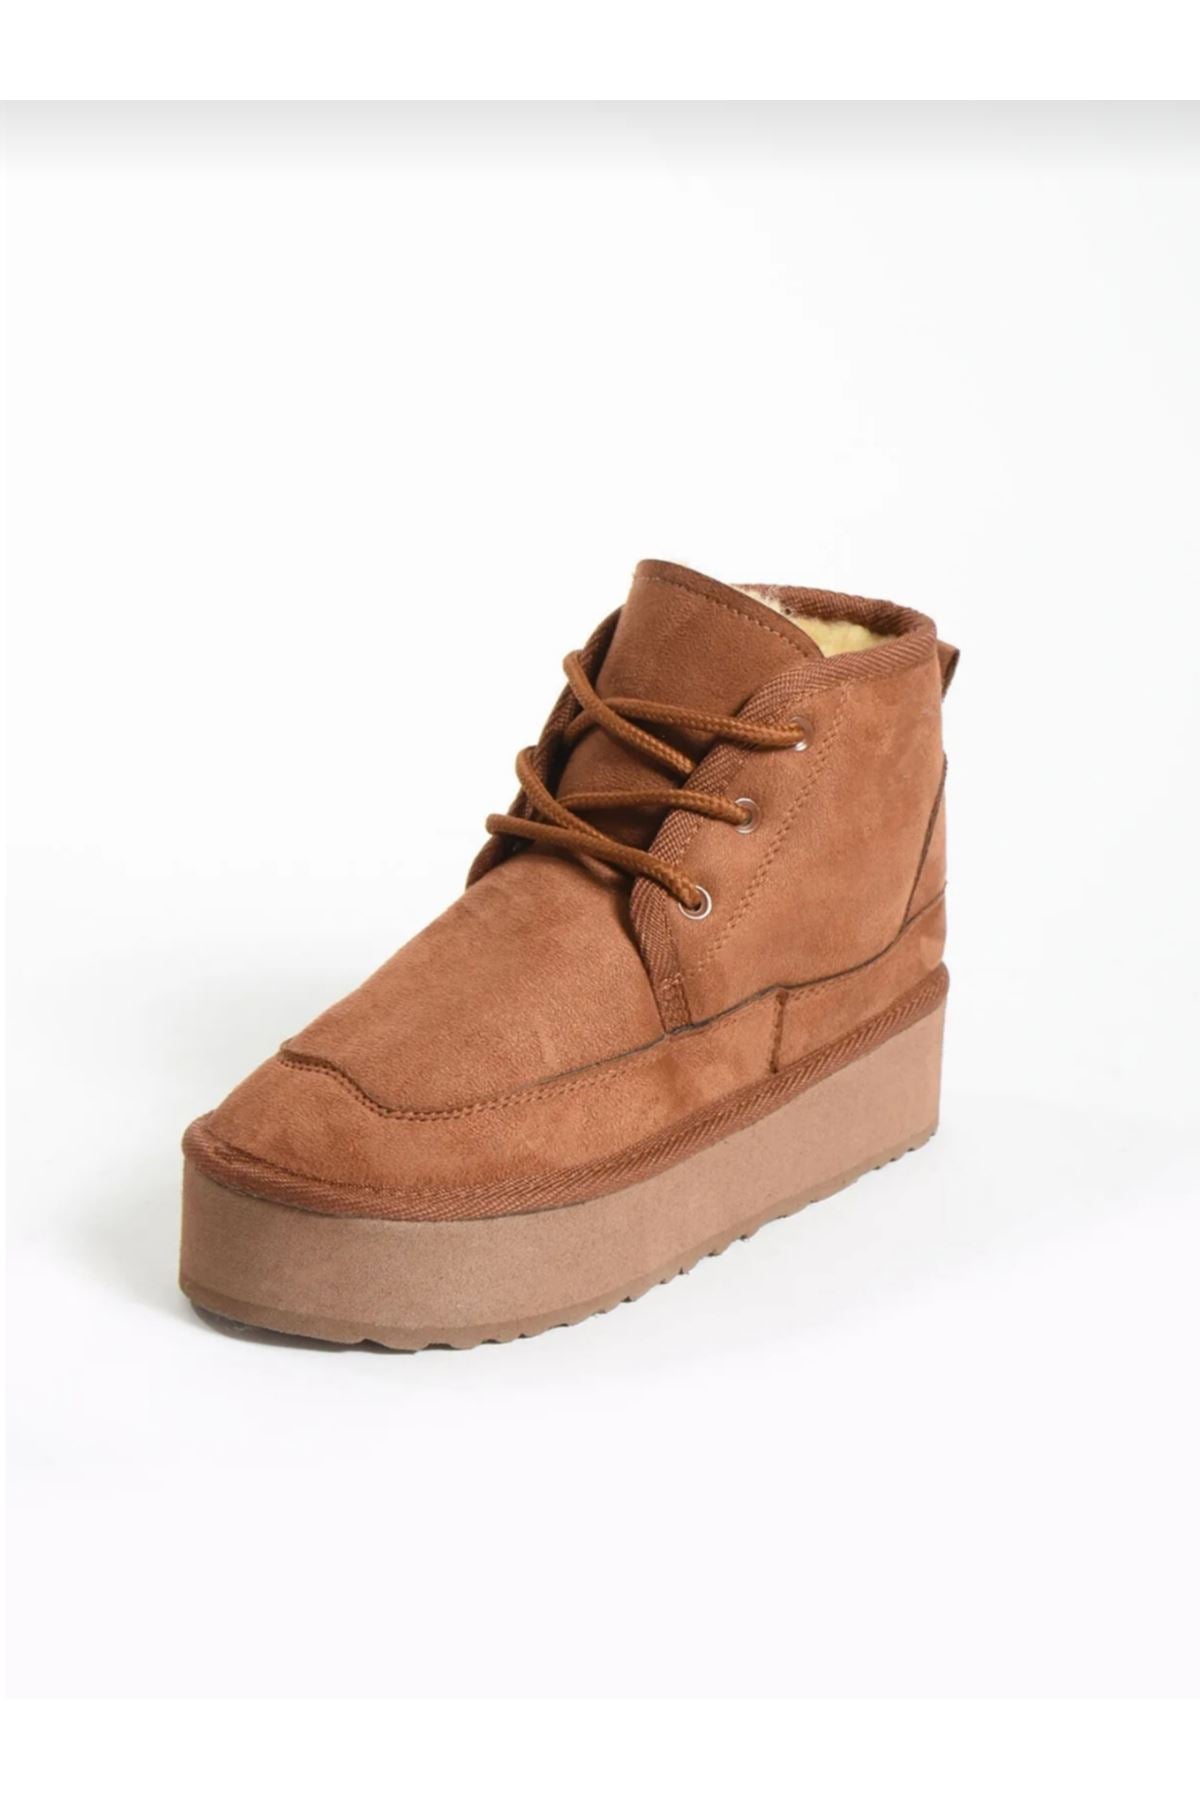 Sesil tan suede lace-up women's boots - STREETMODE™